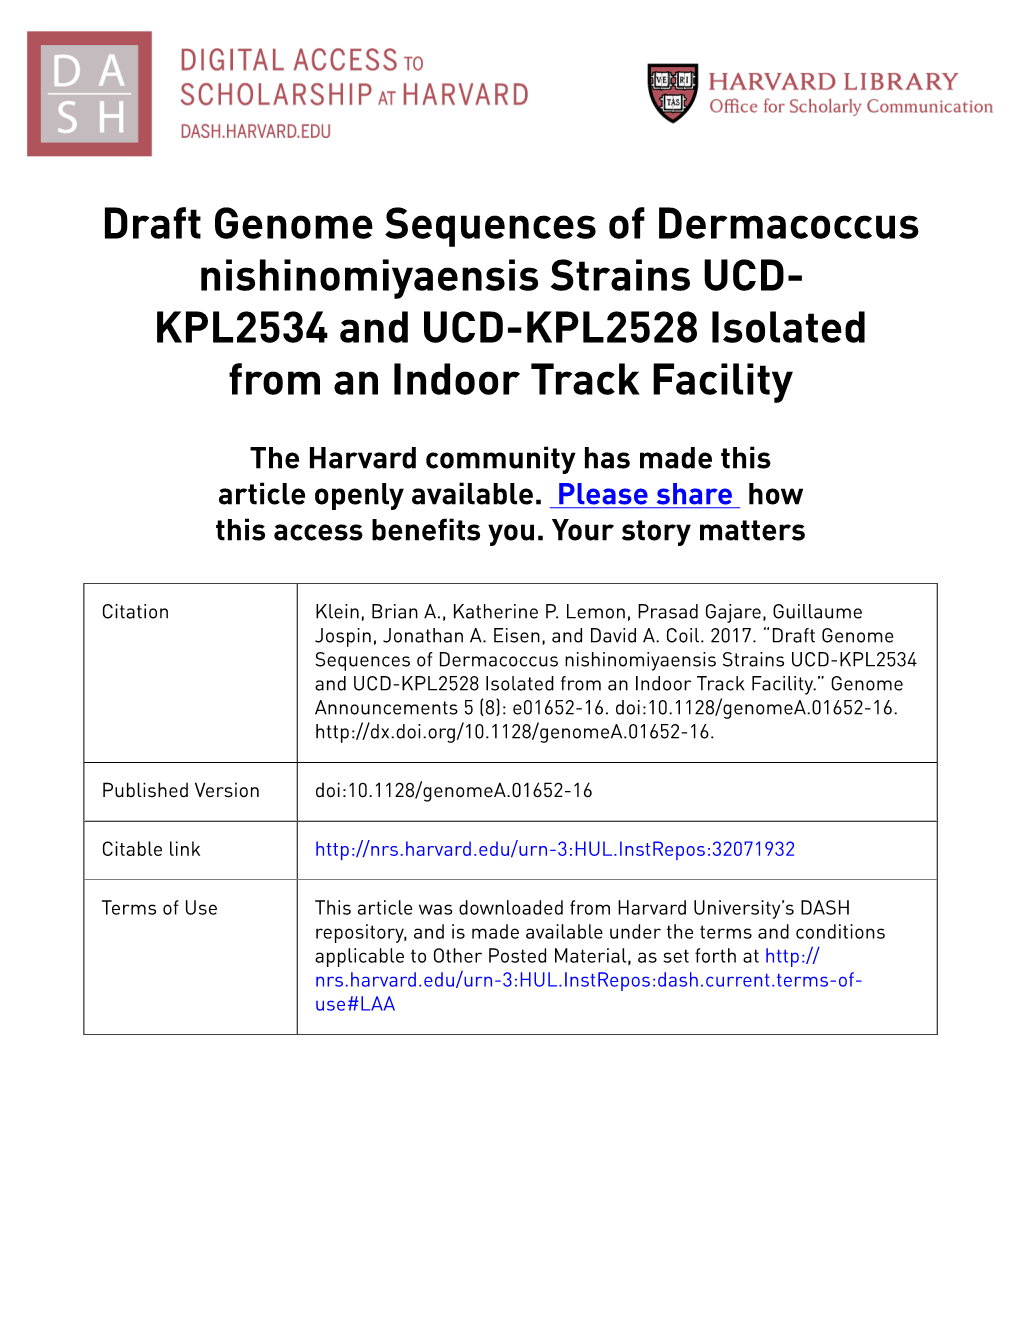 Draft Genome Sequences of Dermacoccus Nishinomiyaensis Strains UCD- KPL2534 and UCD-KPL2528 Isolated from an Indoor Track Facility